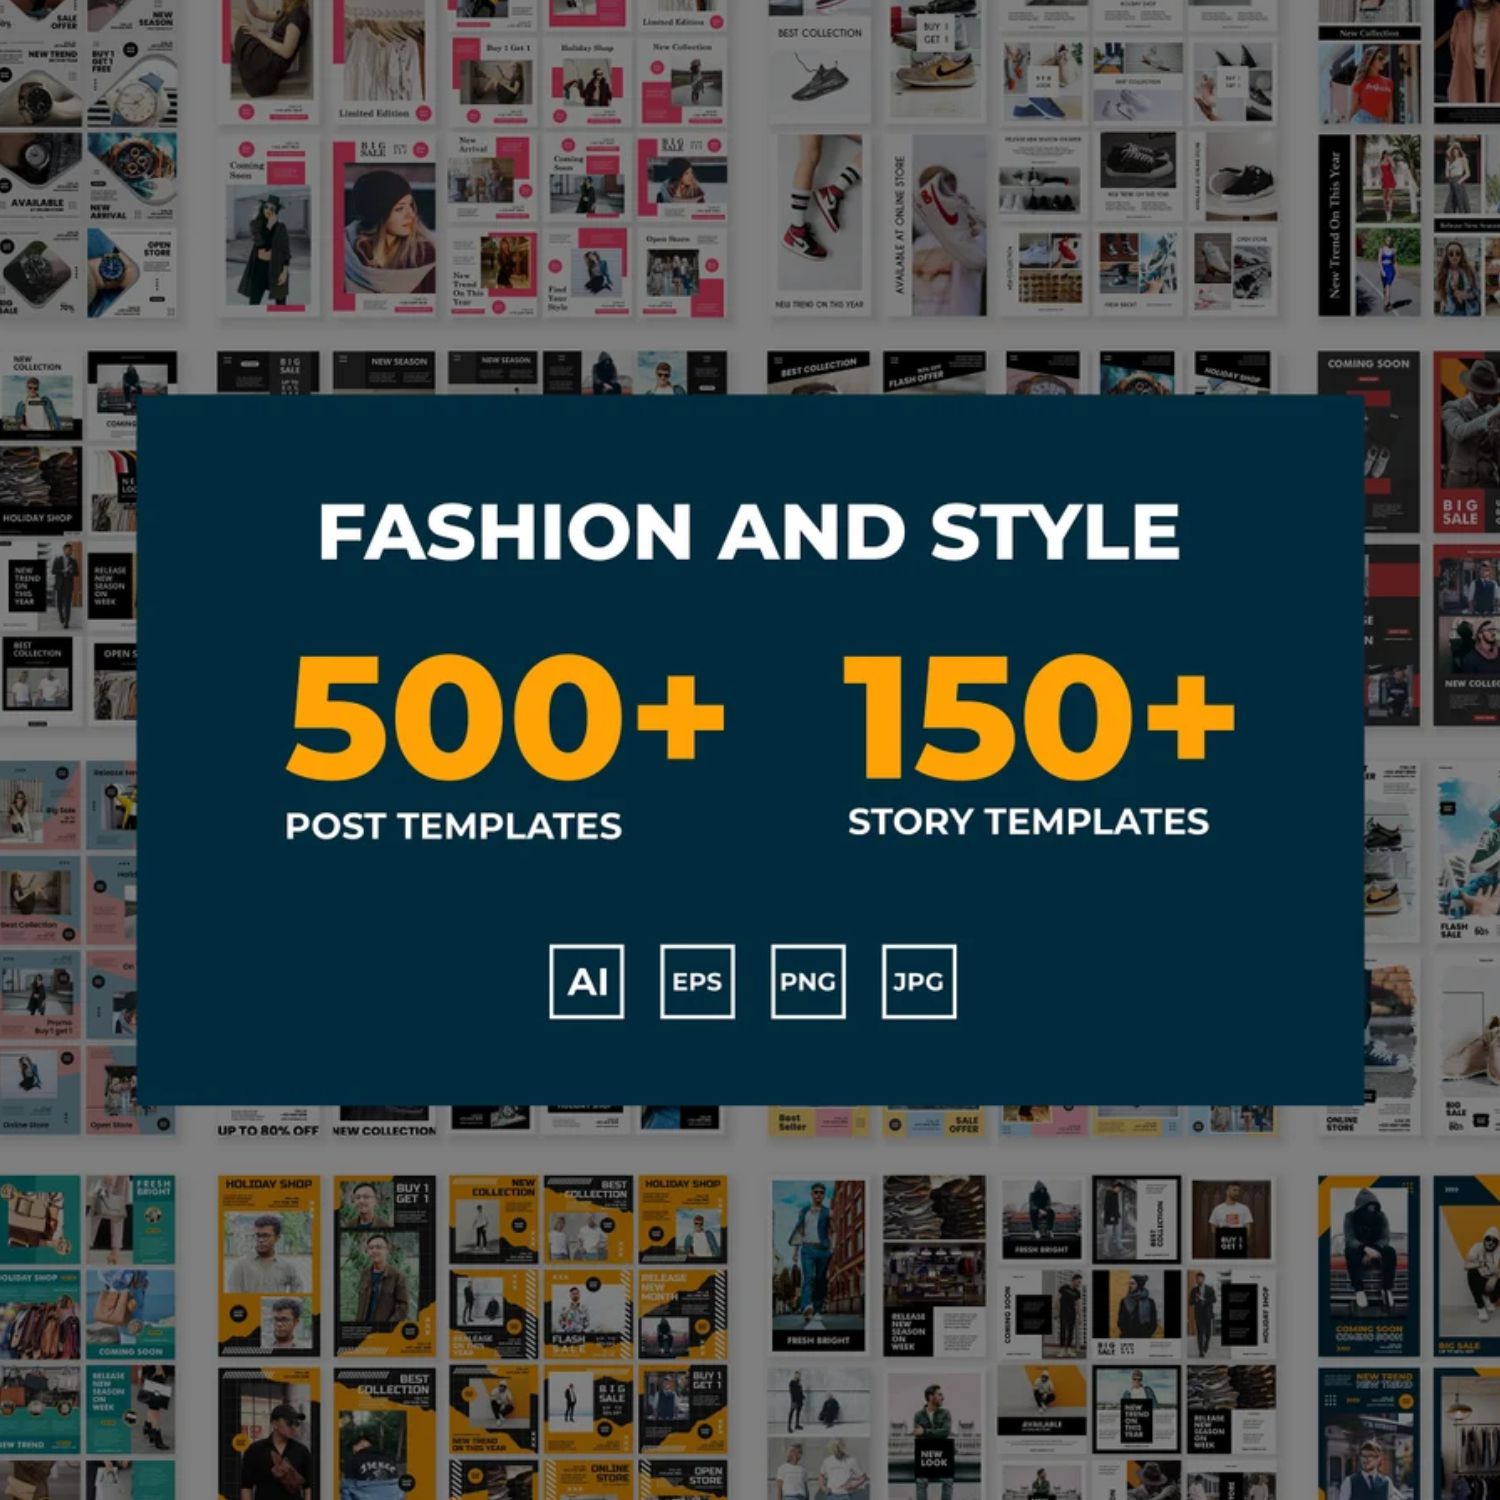 Social Media Bundle Template For Fashion And Style Cover Image.